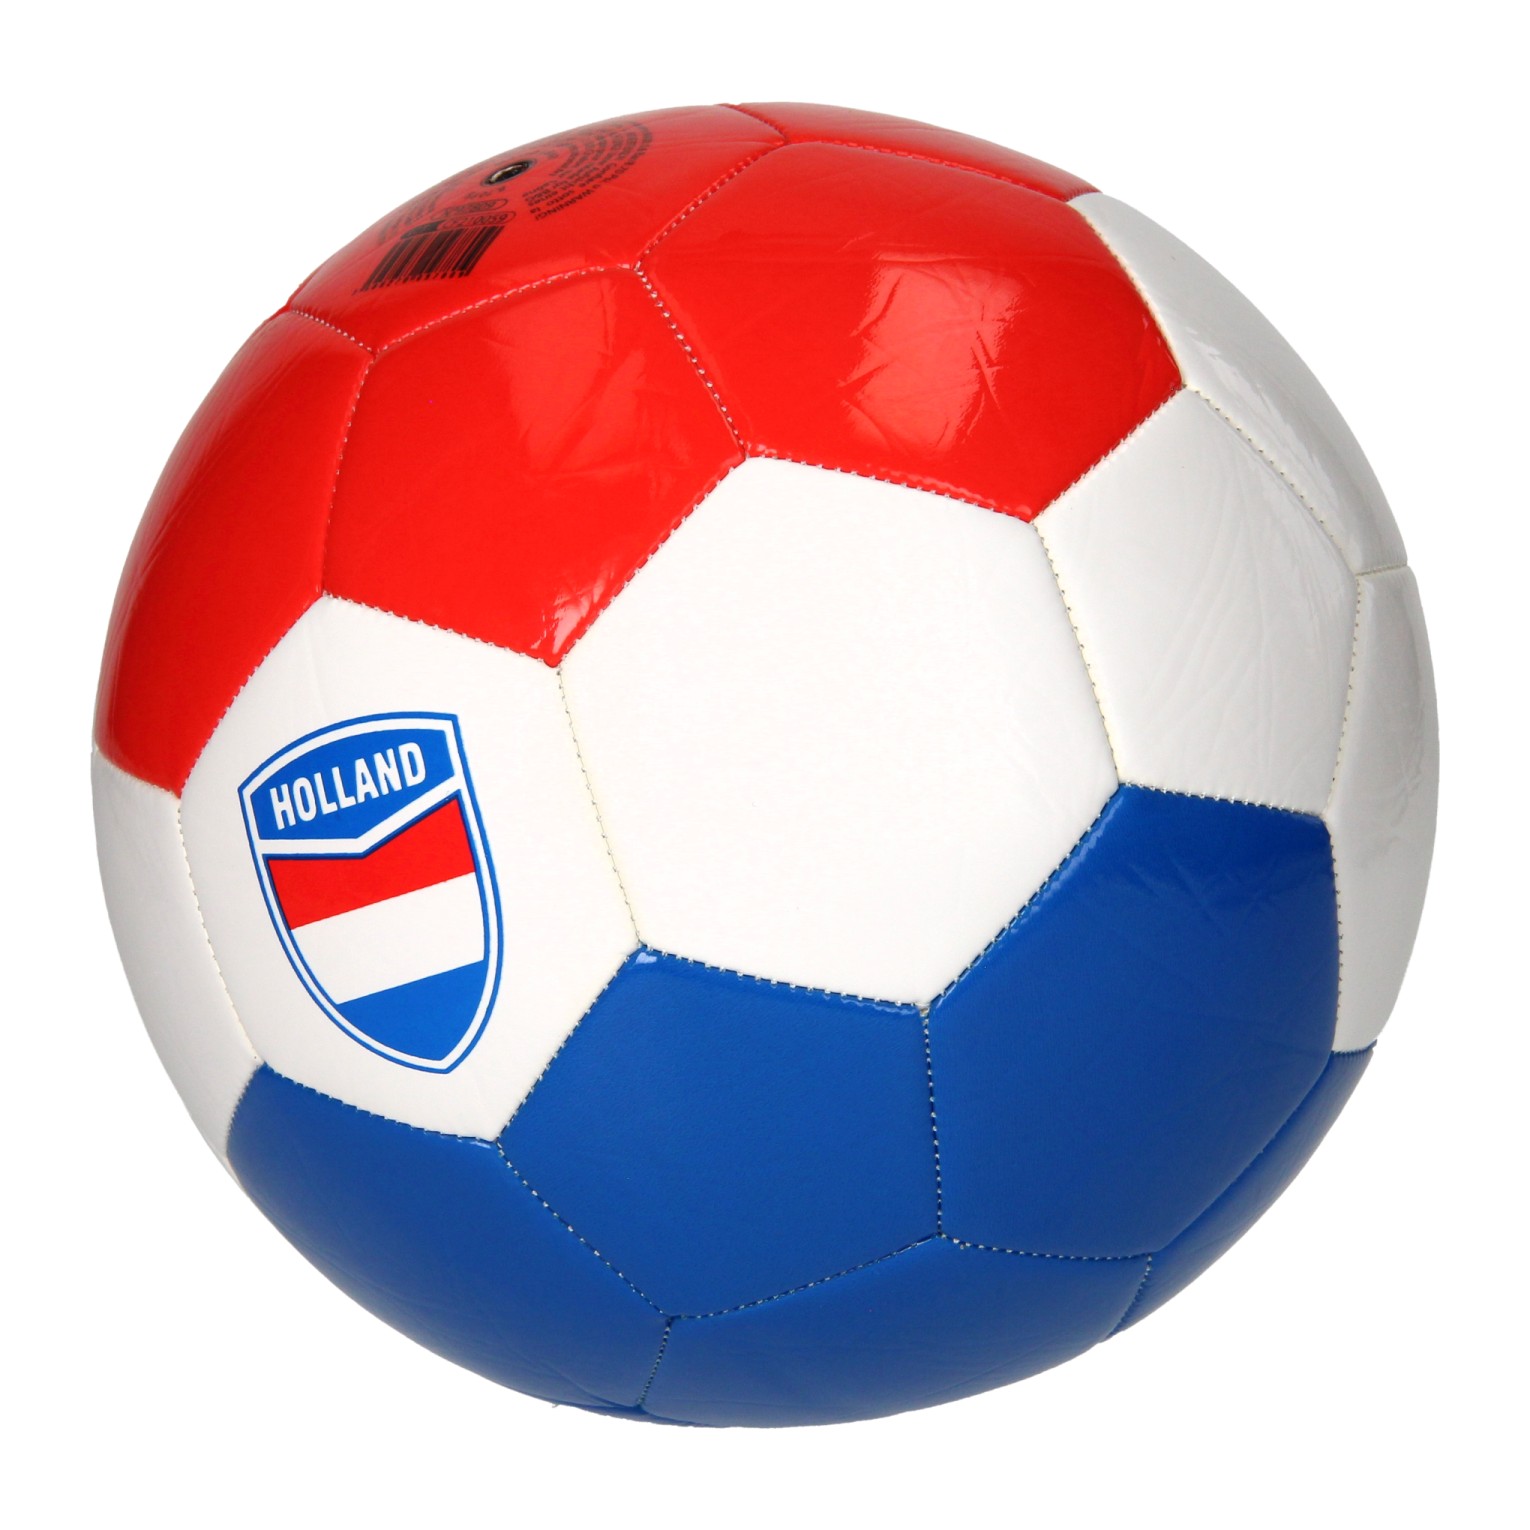 VOETBAL HOLLAND  ROOD-WIT-BLAUW - 4 10 20 30 40 50 60 70 80 90 100 110 120 130 140 150 160 170 180 190 200 210 220 230 240 250 260 270 280 290 300 310 320 330 340 350 360 370 380 390 400 410 420 430 440 450 460 470 480 490 500 510 520 530 540 550